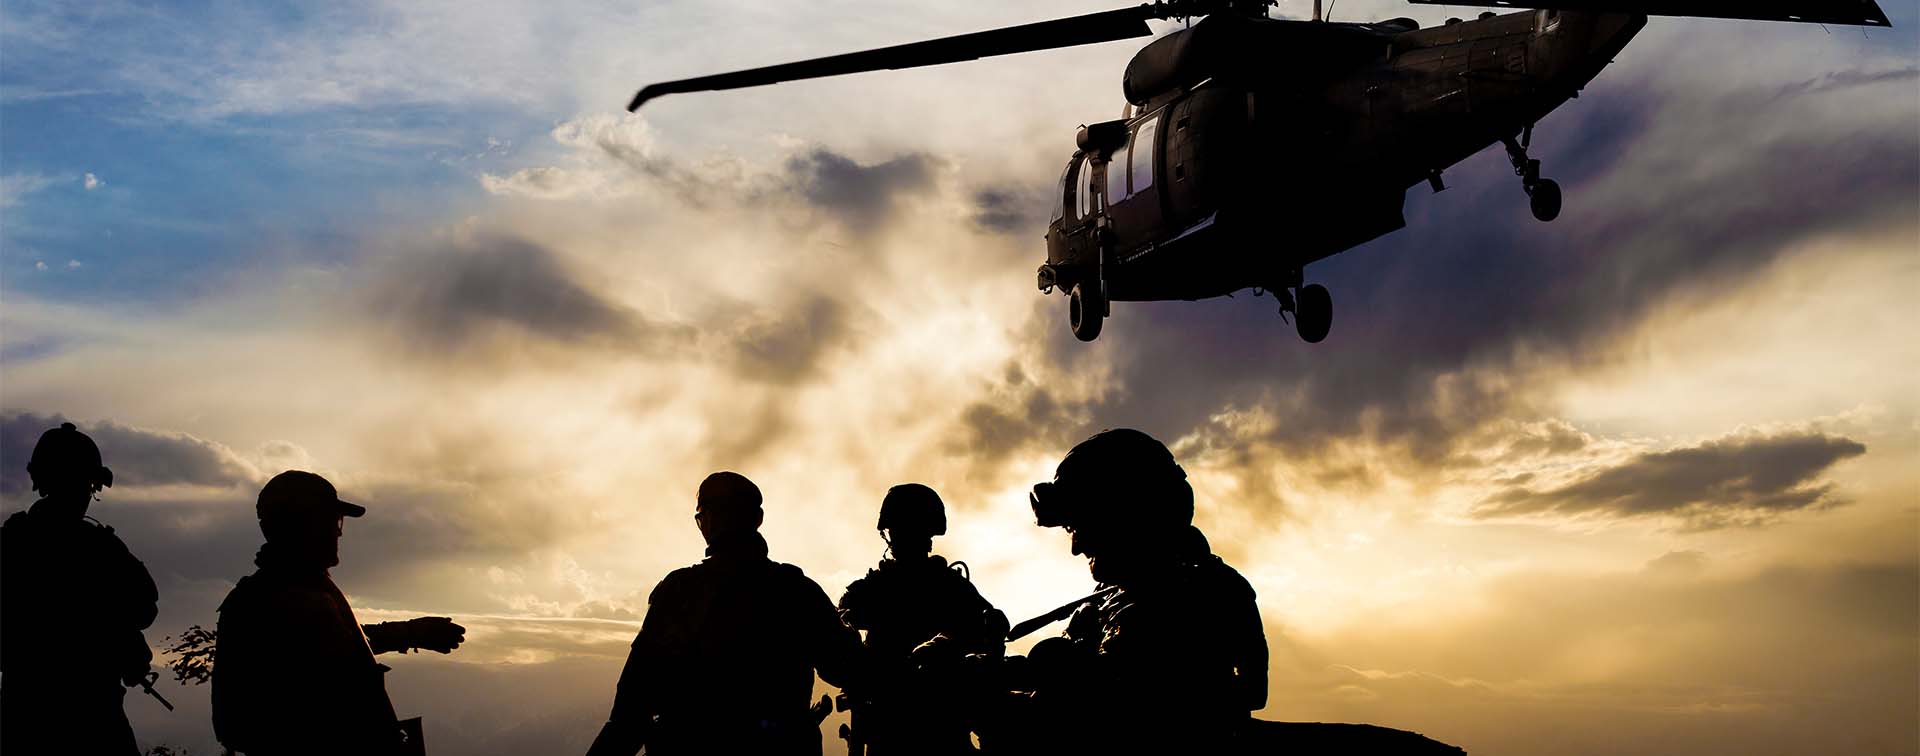 Silhouettes of soldiers during Military Mission at dusk